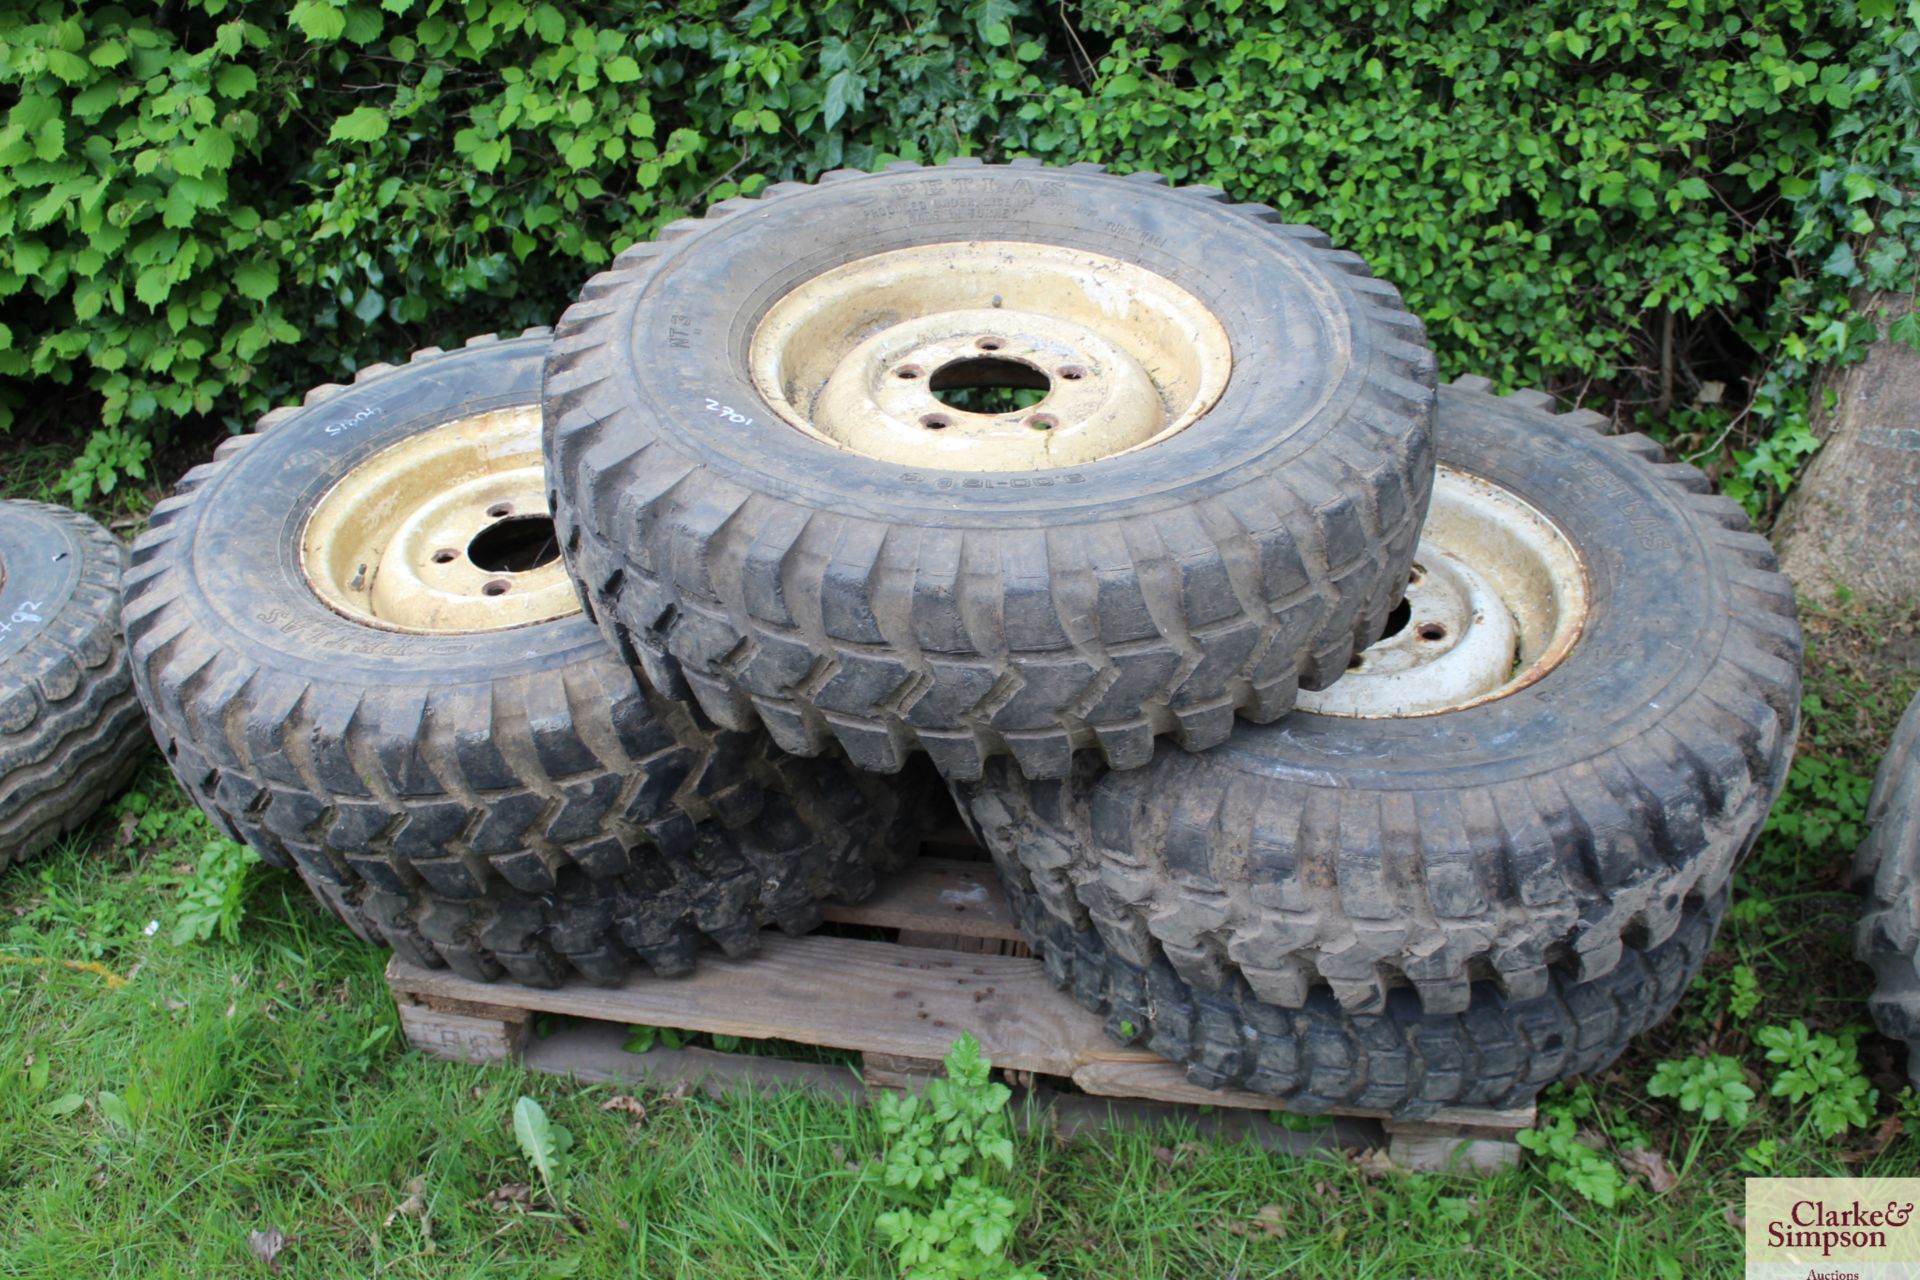 5x Land Rover steel wheels with off-road tyres.